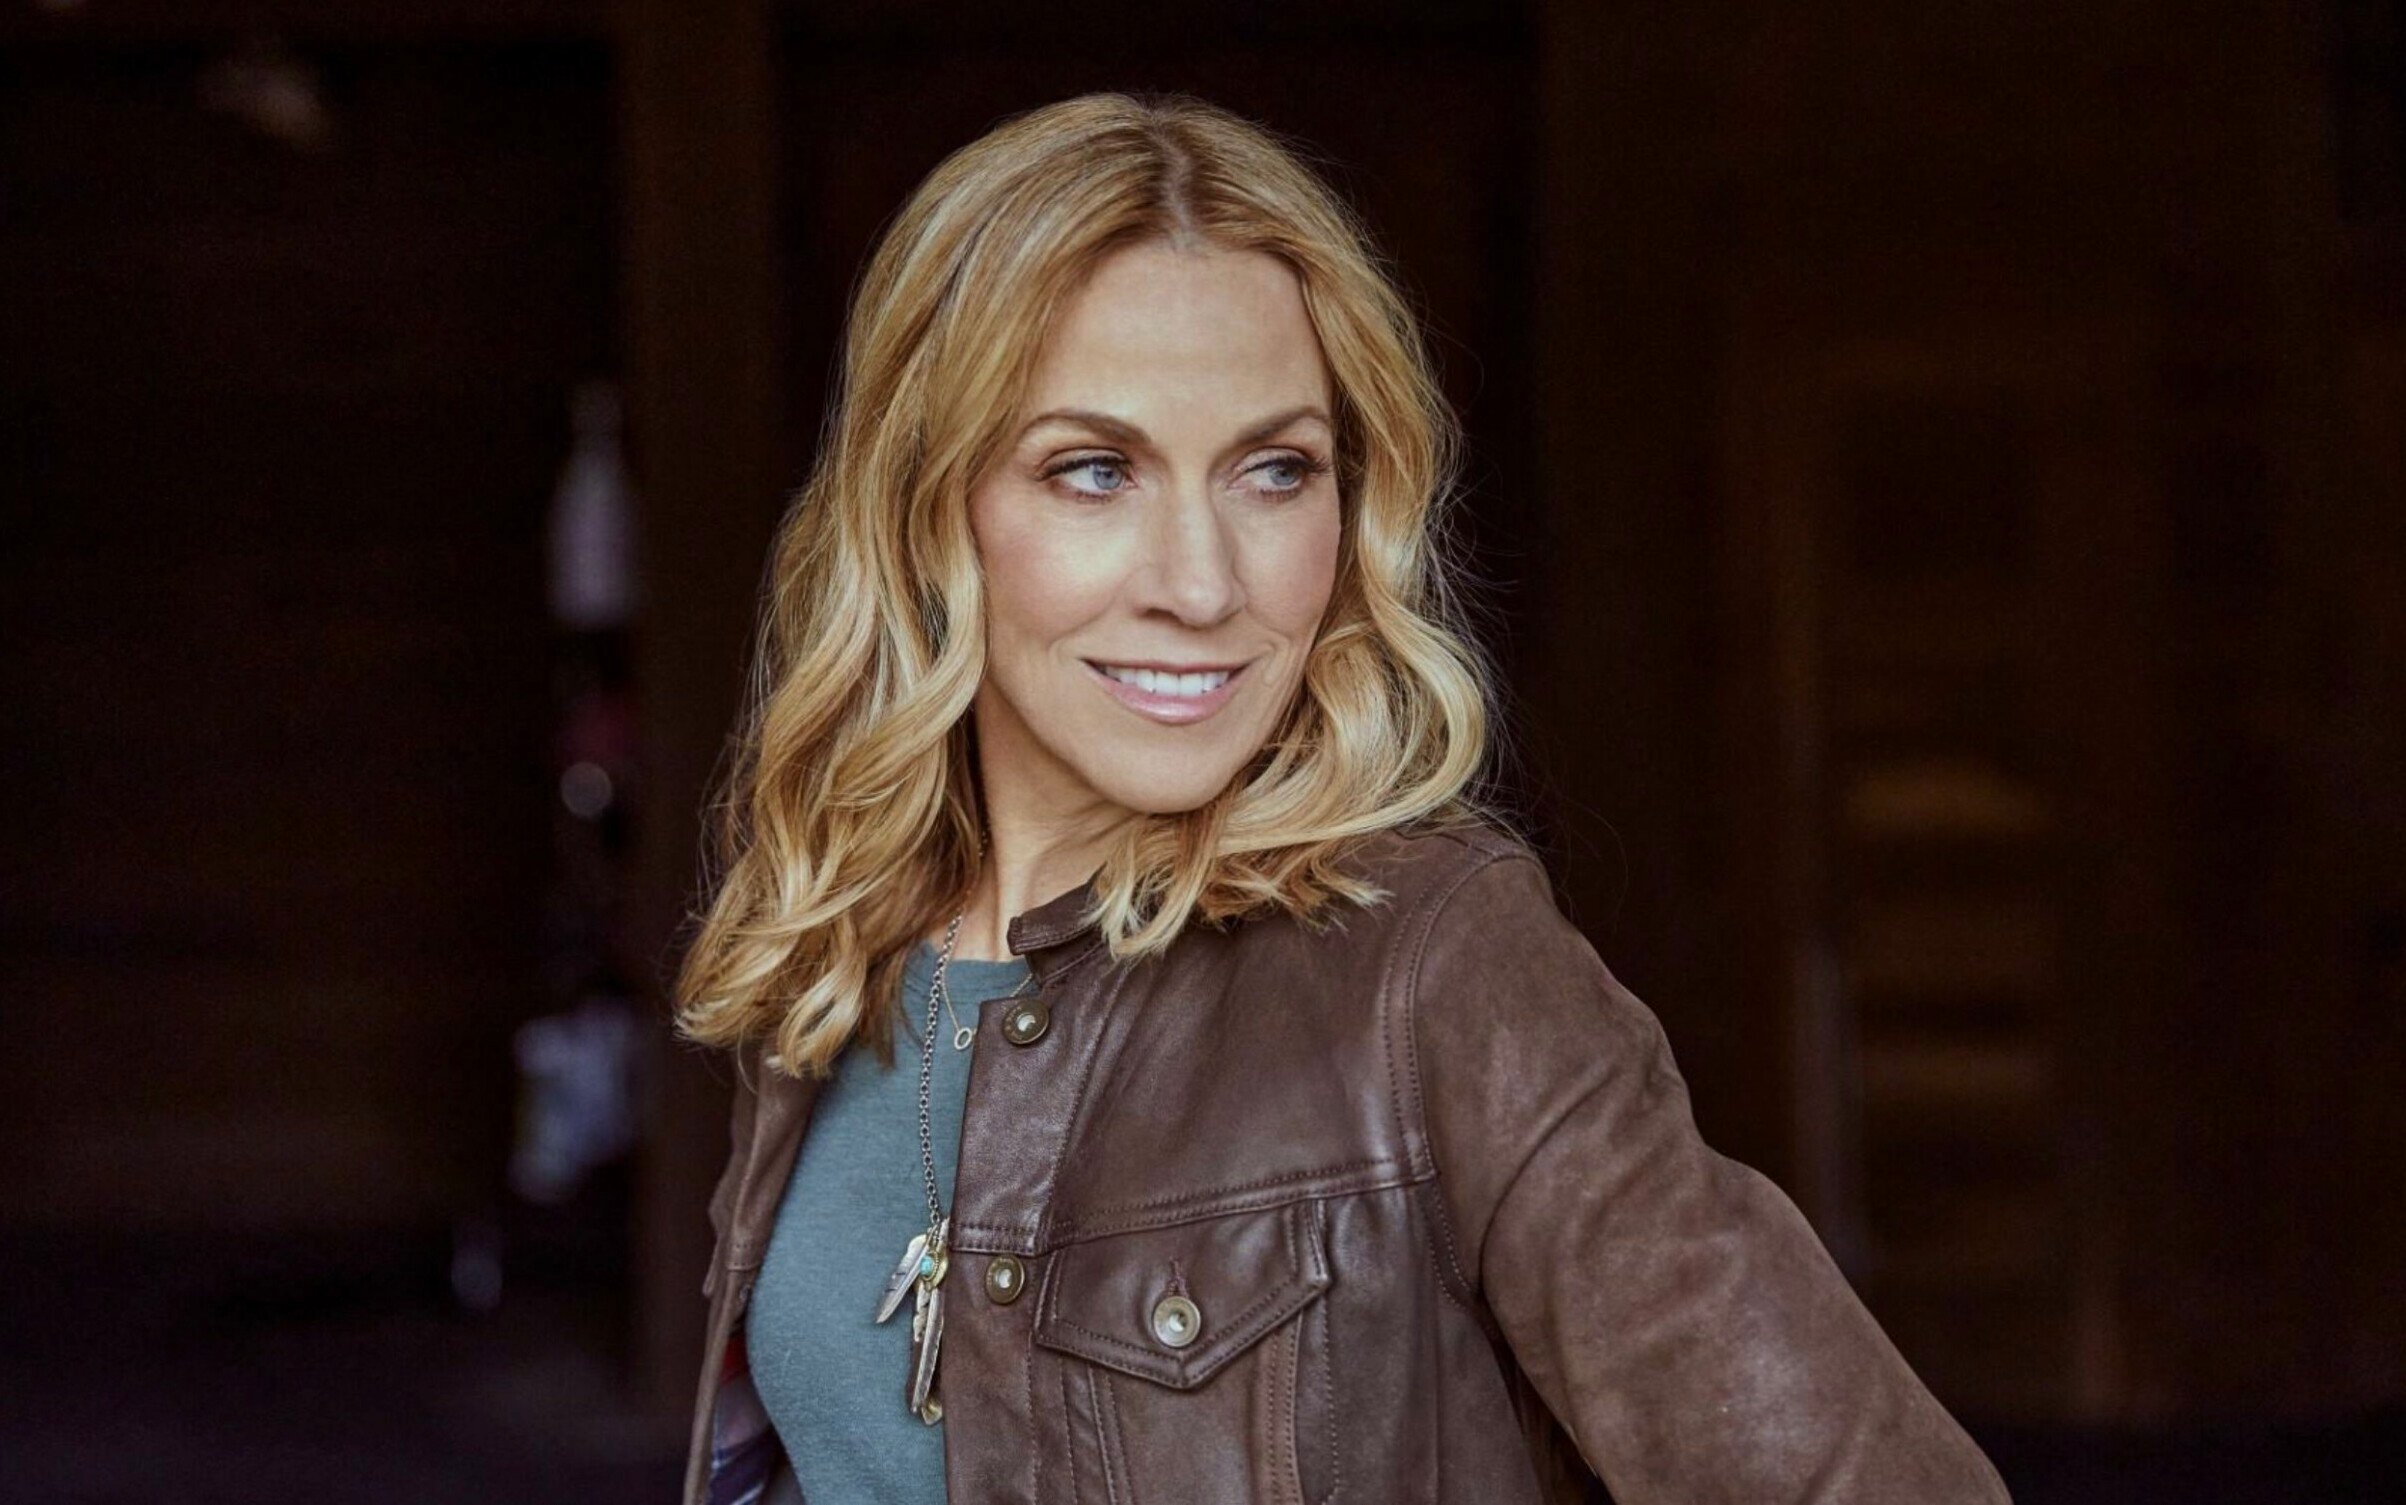 Sheryl Crow's Life Story Unfolded in SHERYL on SBS